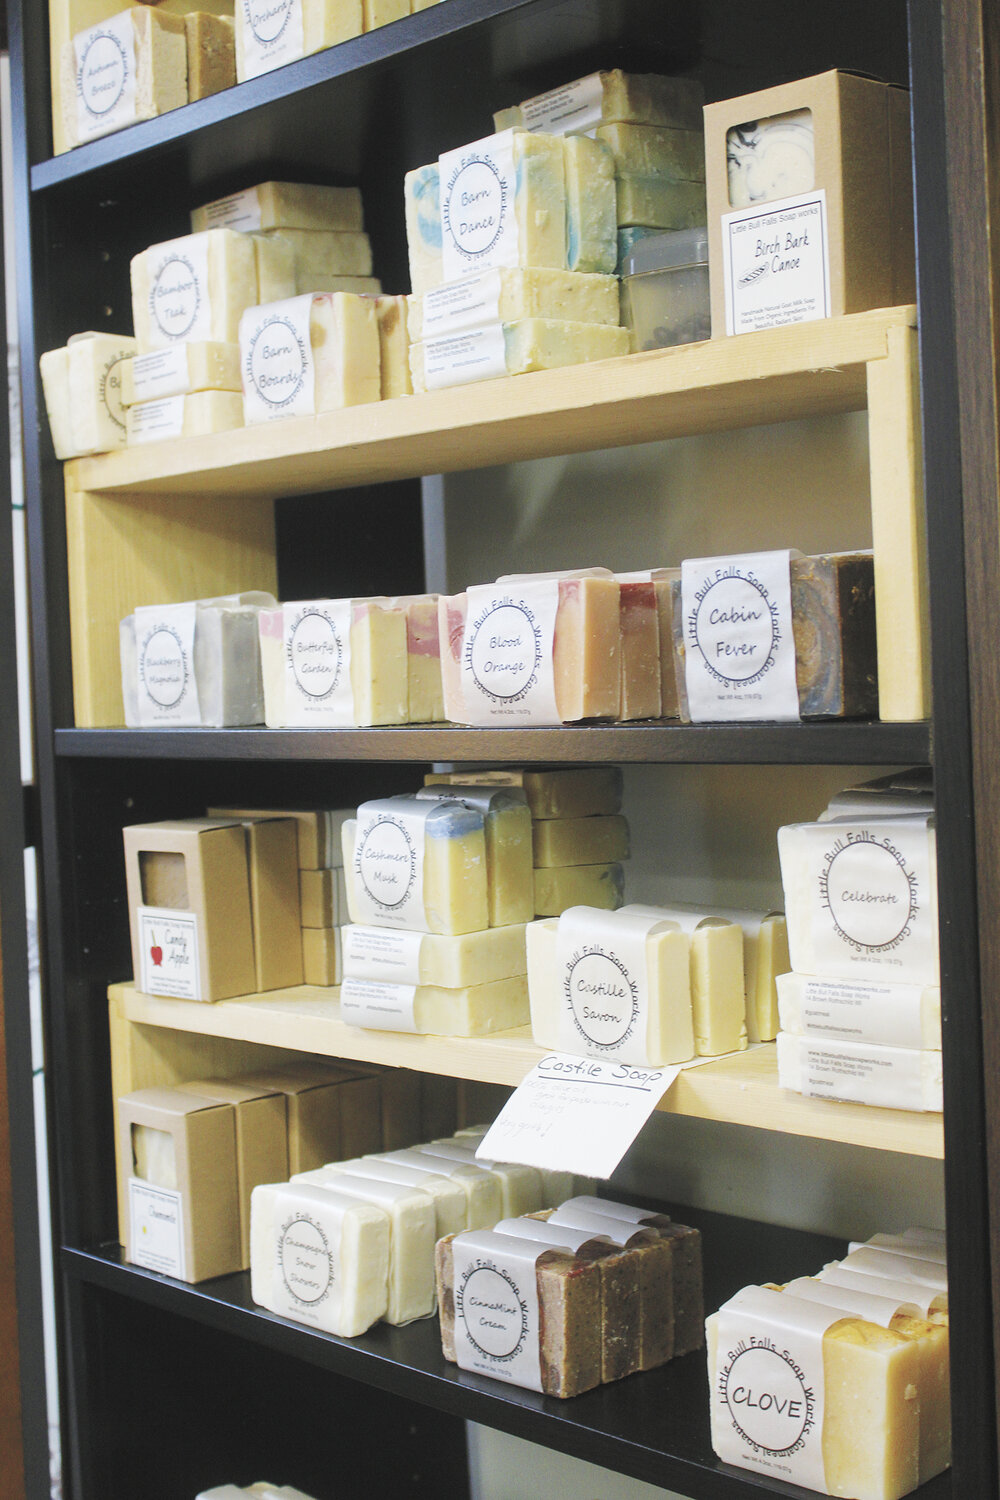 Some of the more than 100 varieties of soap made from goat’s milk sit on the shelves Feb. 3 at Little Bull Falls Soap Works in Rothschild, Wisconsin. Michelle Neathery uses nearly 100 pounds of powdered goat’s milk each year to make the soaps.